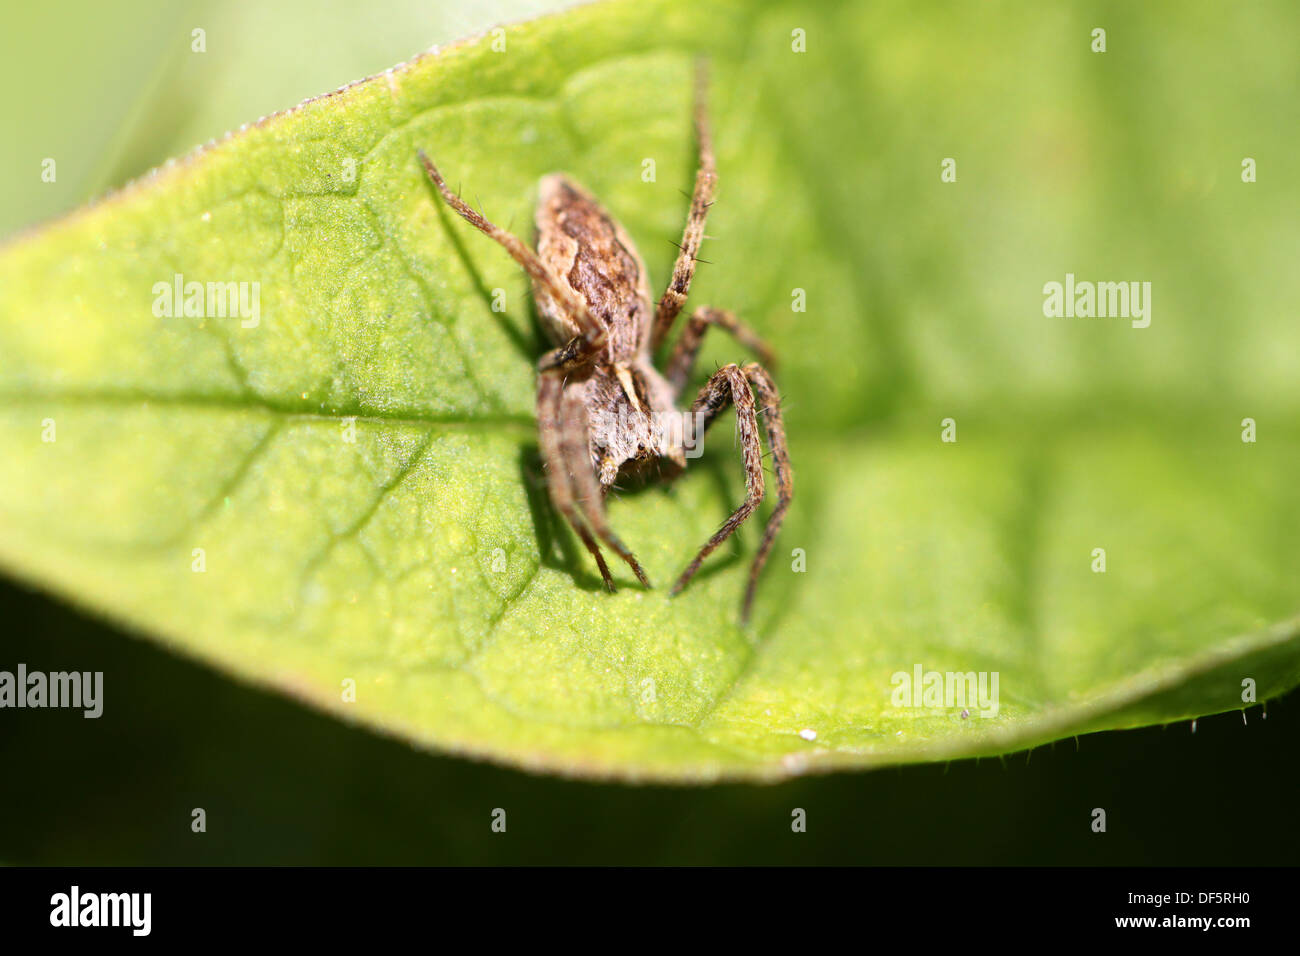 A small brown spider is sitting on a green leaf Stock Photo